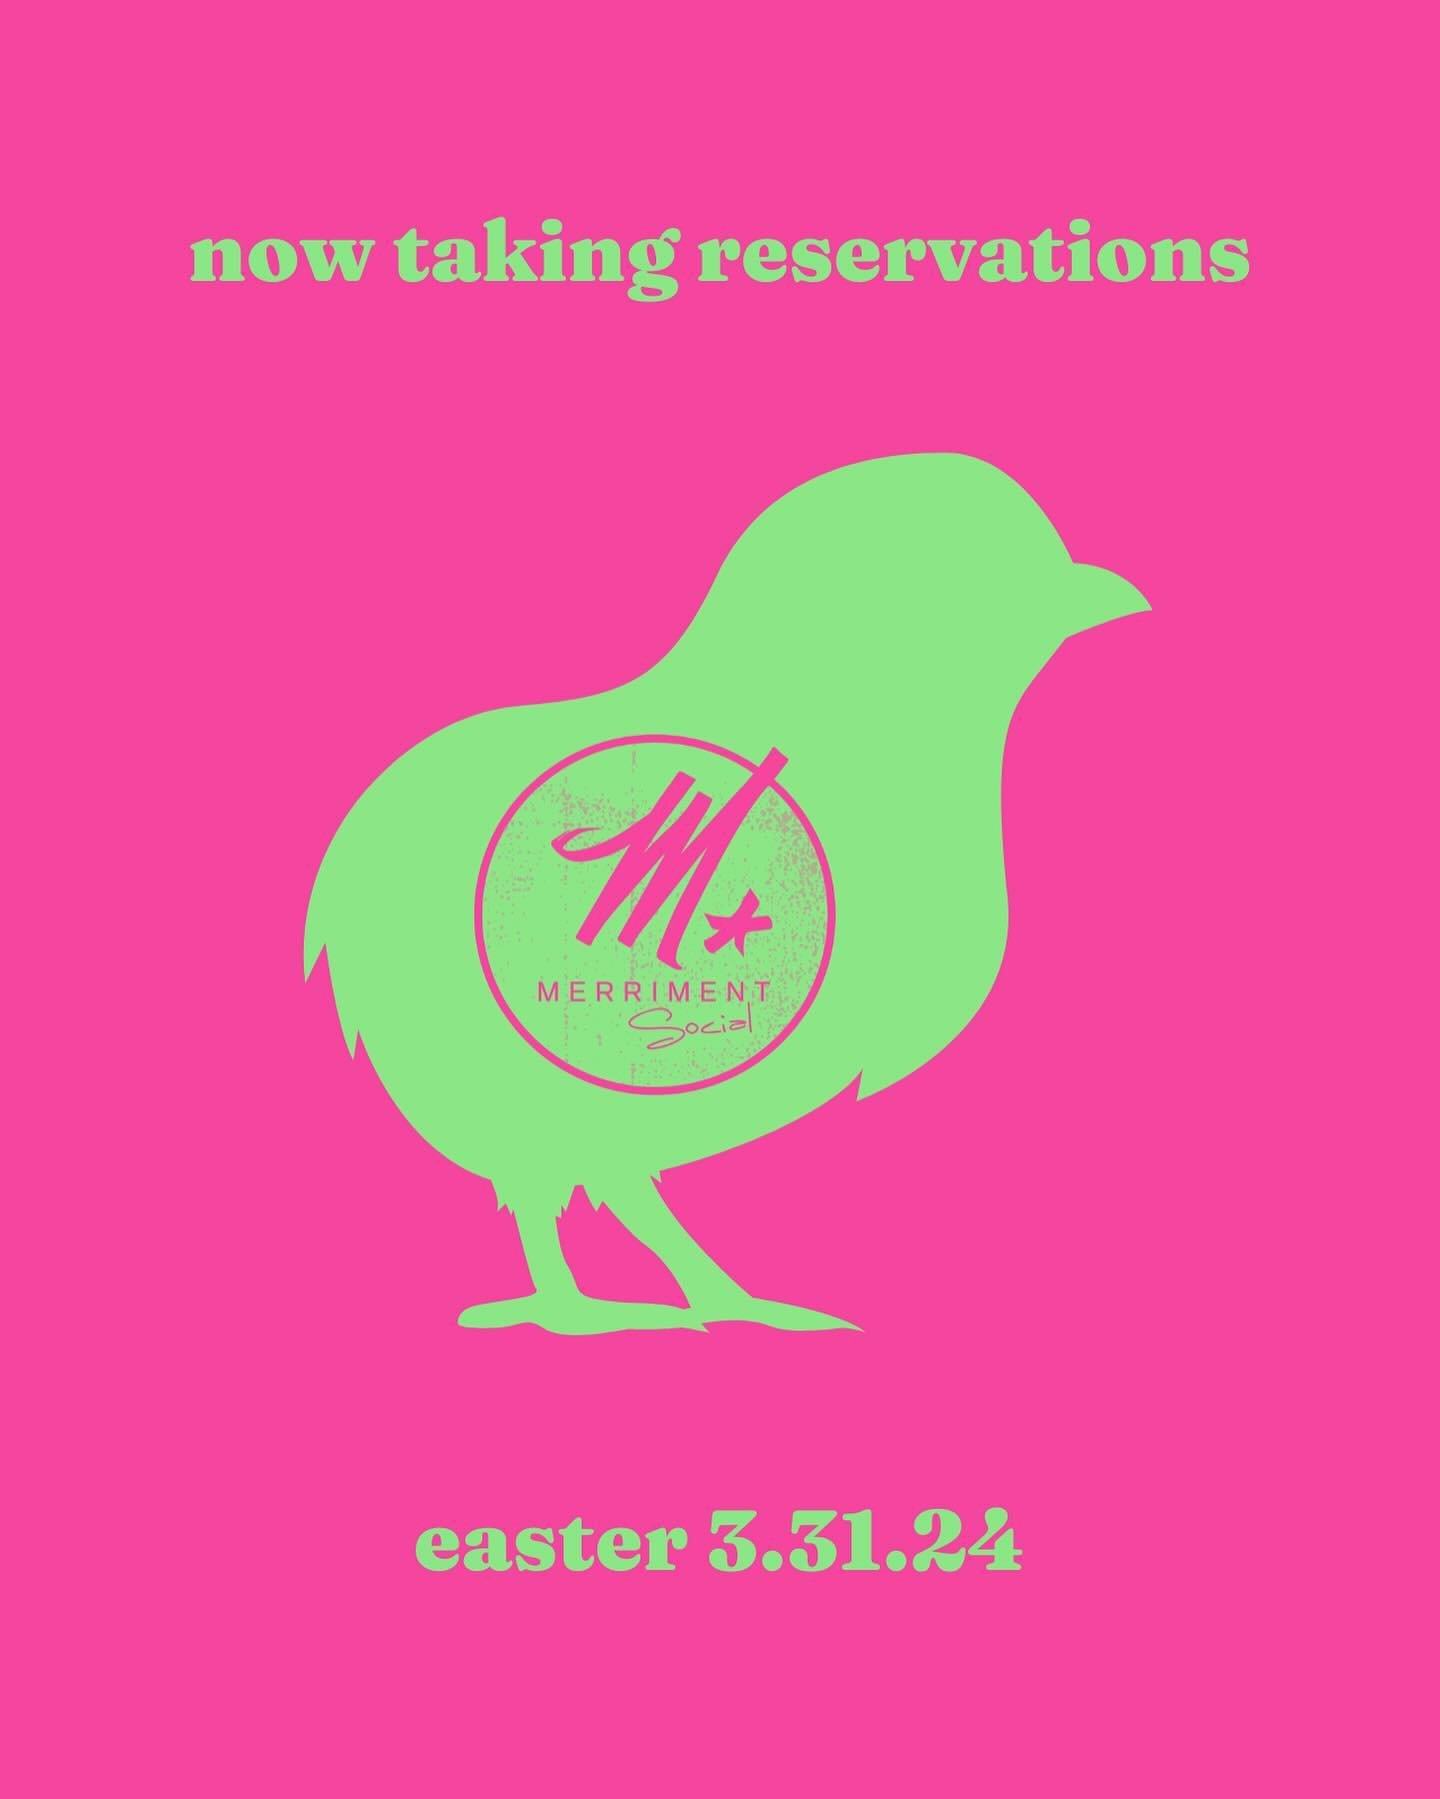 Check out the menu for this year&rsquo;s Easter Brunch! This always sells out, so snag your spot now - reservations available at the link in our bio!